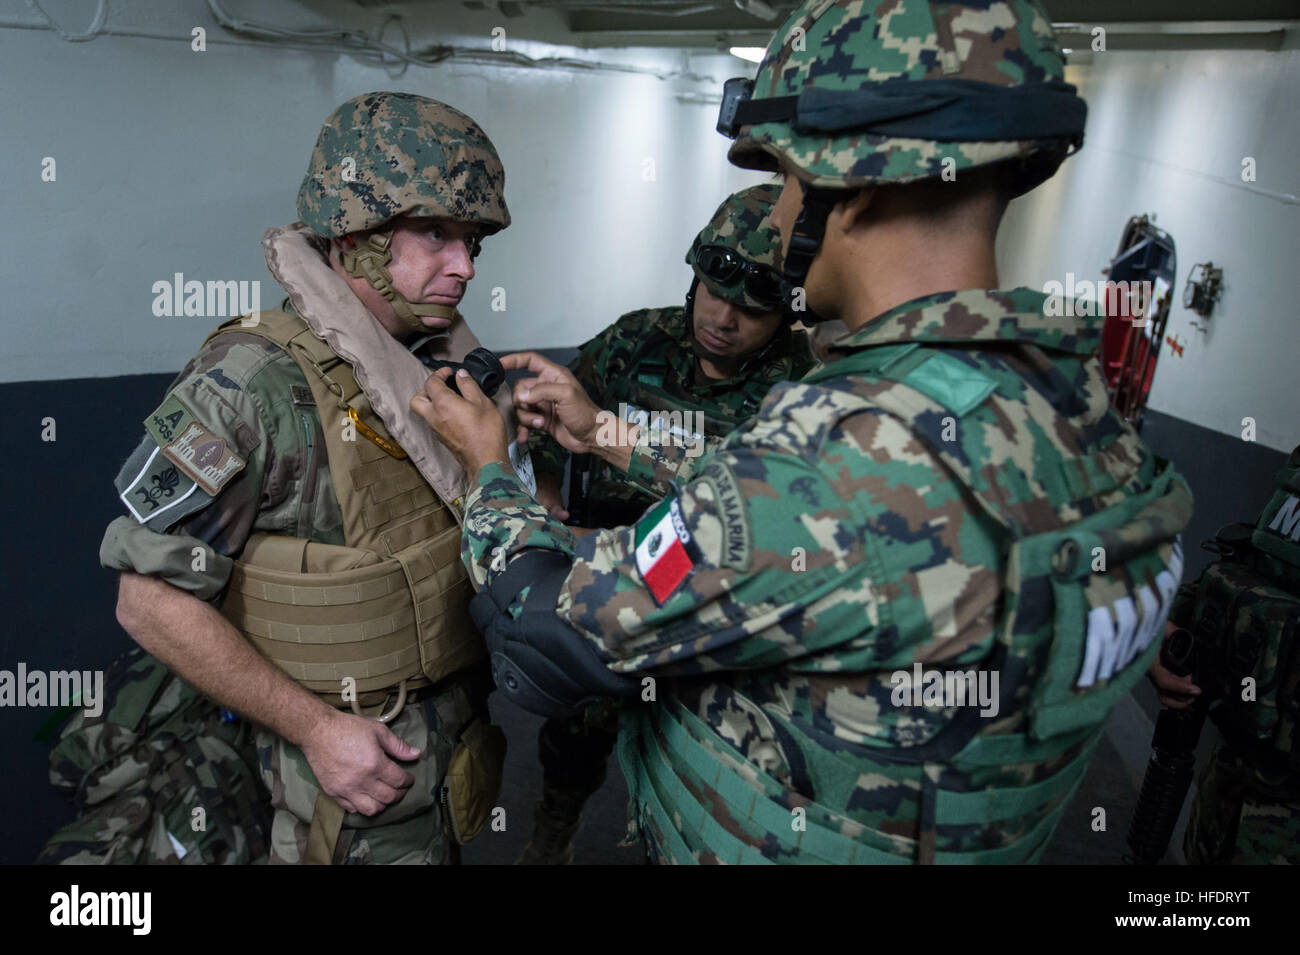 Members of the Mexican Naval Infantry Force help a French Legionaire don water survival gear prior to departing amphibious assault ship USS Kearsarge (LHD 3) via helicopter during the multi-national exercise Bold Alligator 2014 (BA14). Improving Navy-Marine Corps amphibious core competencies along with coalition, North Atlantic Treaty Organization (NATO), Allied and partner nations is a necessary investment in the current and future readiness of our forces. BA14 will take place Oct. 29 - Nov. 10, 2014, afloat and ashore along the eastern seaboard. #BA14 (U.S. Navy photo by Mass Communication S Stock Photo